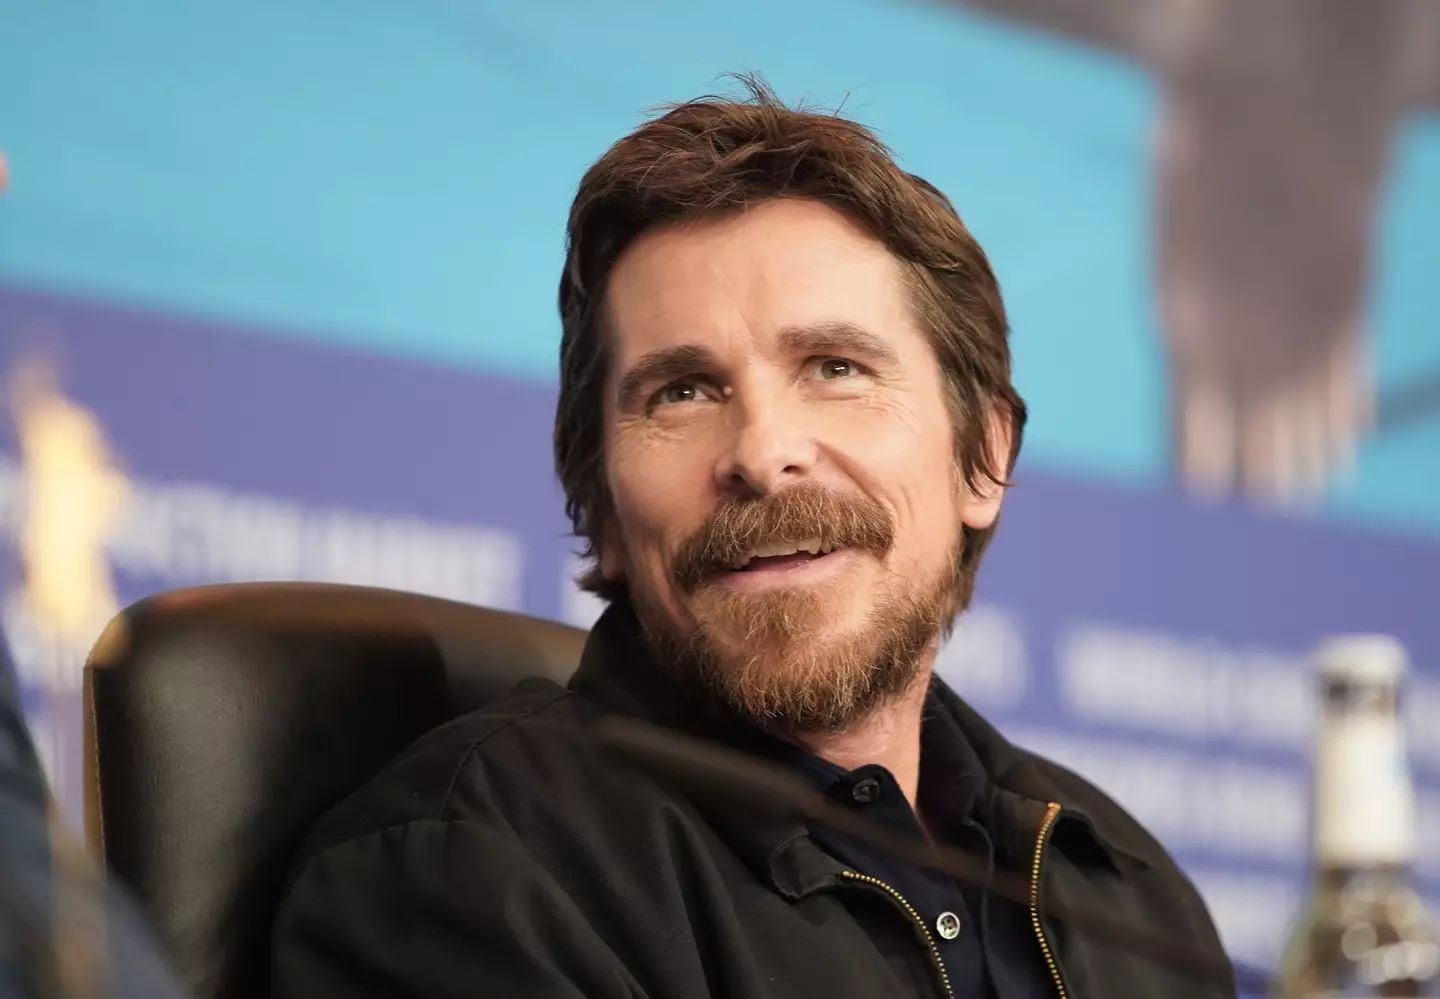 Christian Bale will make his Marvel debut in Thor: Love and Thunder.